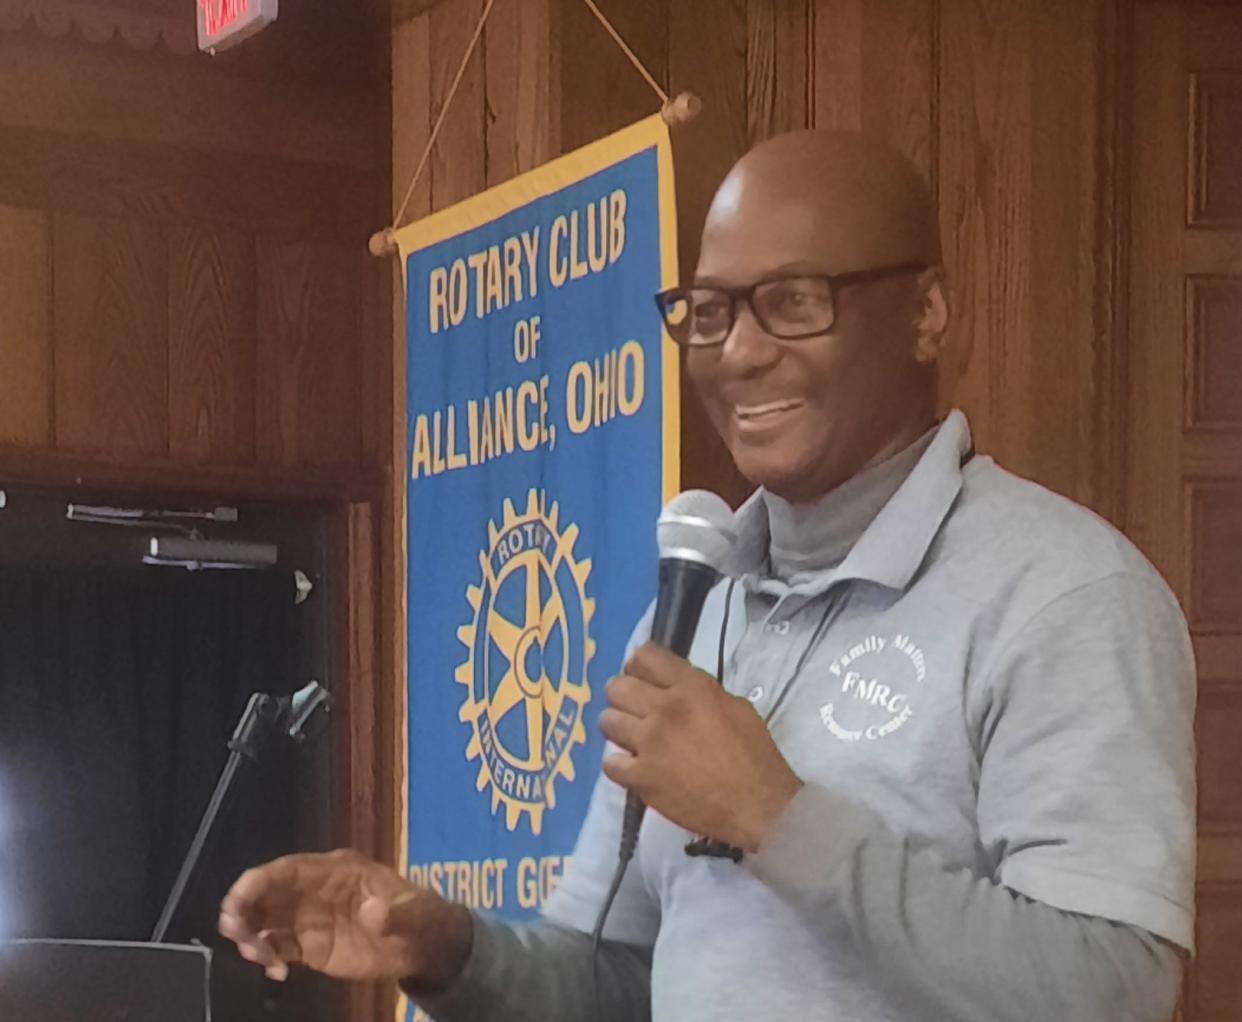 Alliance Rotary Club member Raymont Johnson speaks during a luncheon meeting, sharing details on his church and the Family Matters Resource Center.